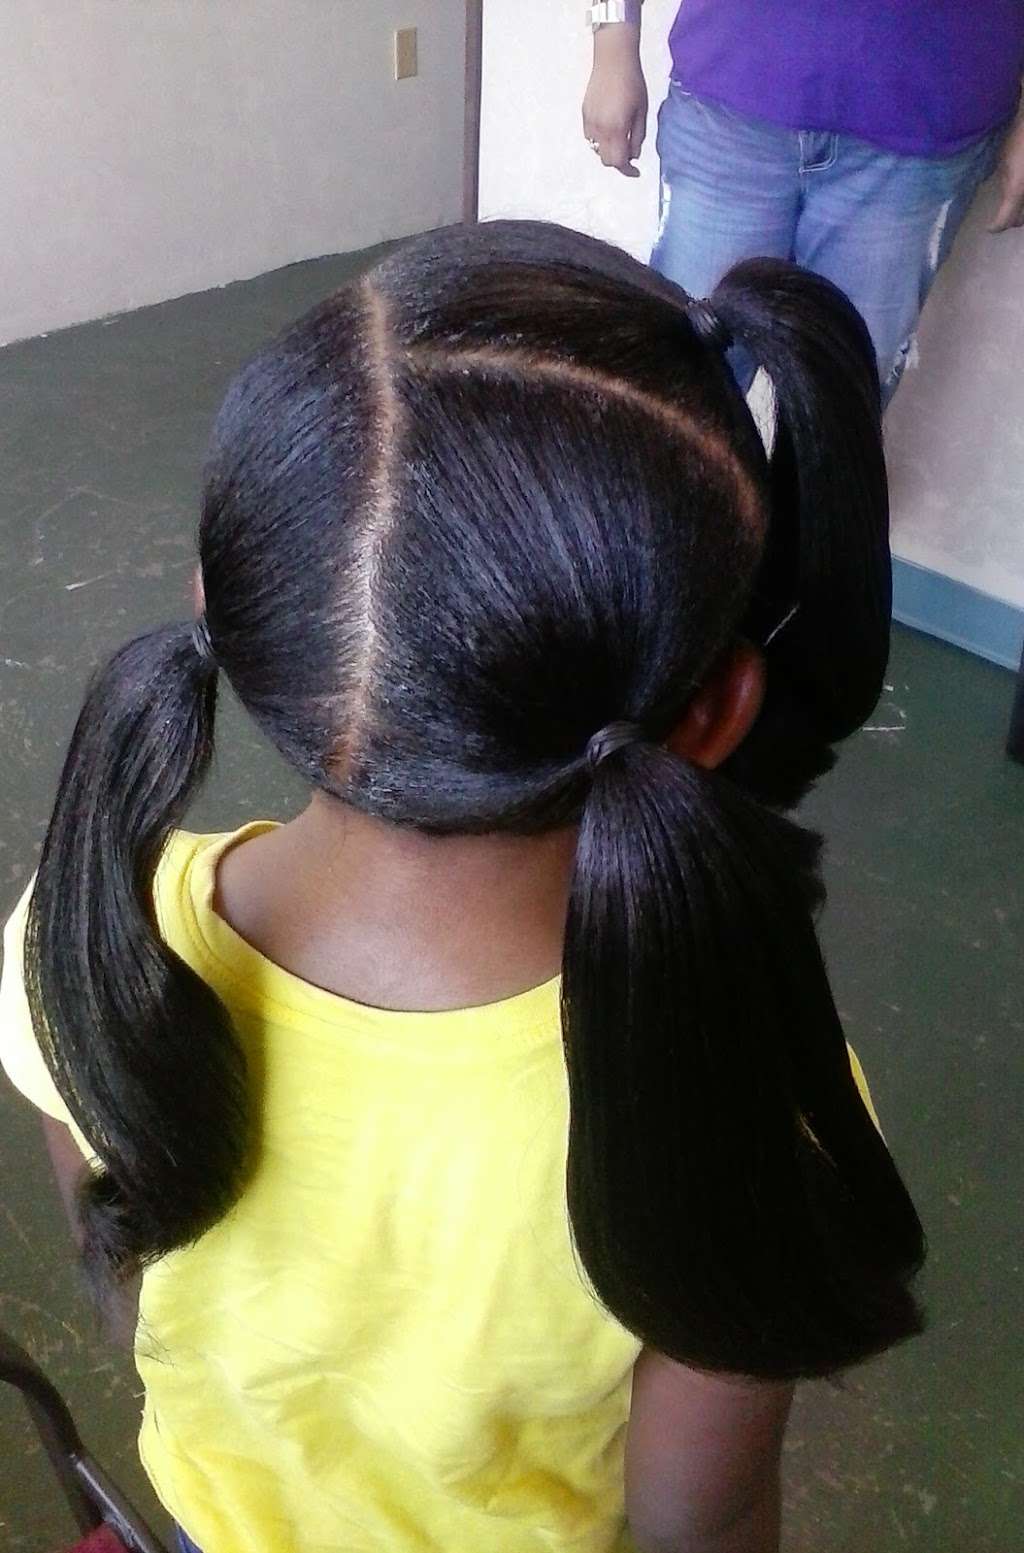 I & R Hair Studio | 42 Manor Ave SW ste d, Concord, NC 28025 | Phone: (704) 249-9348